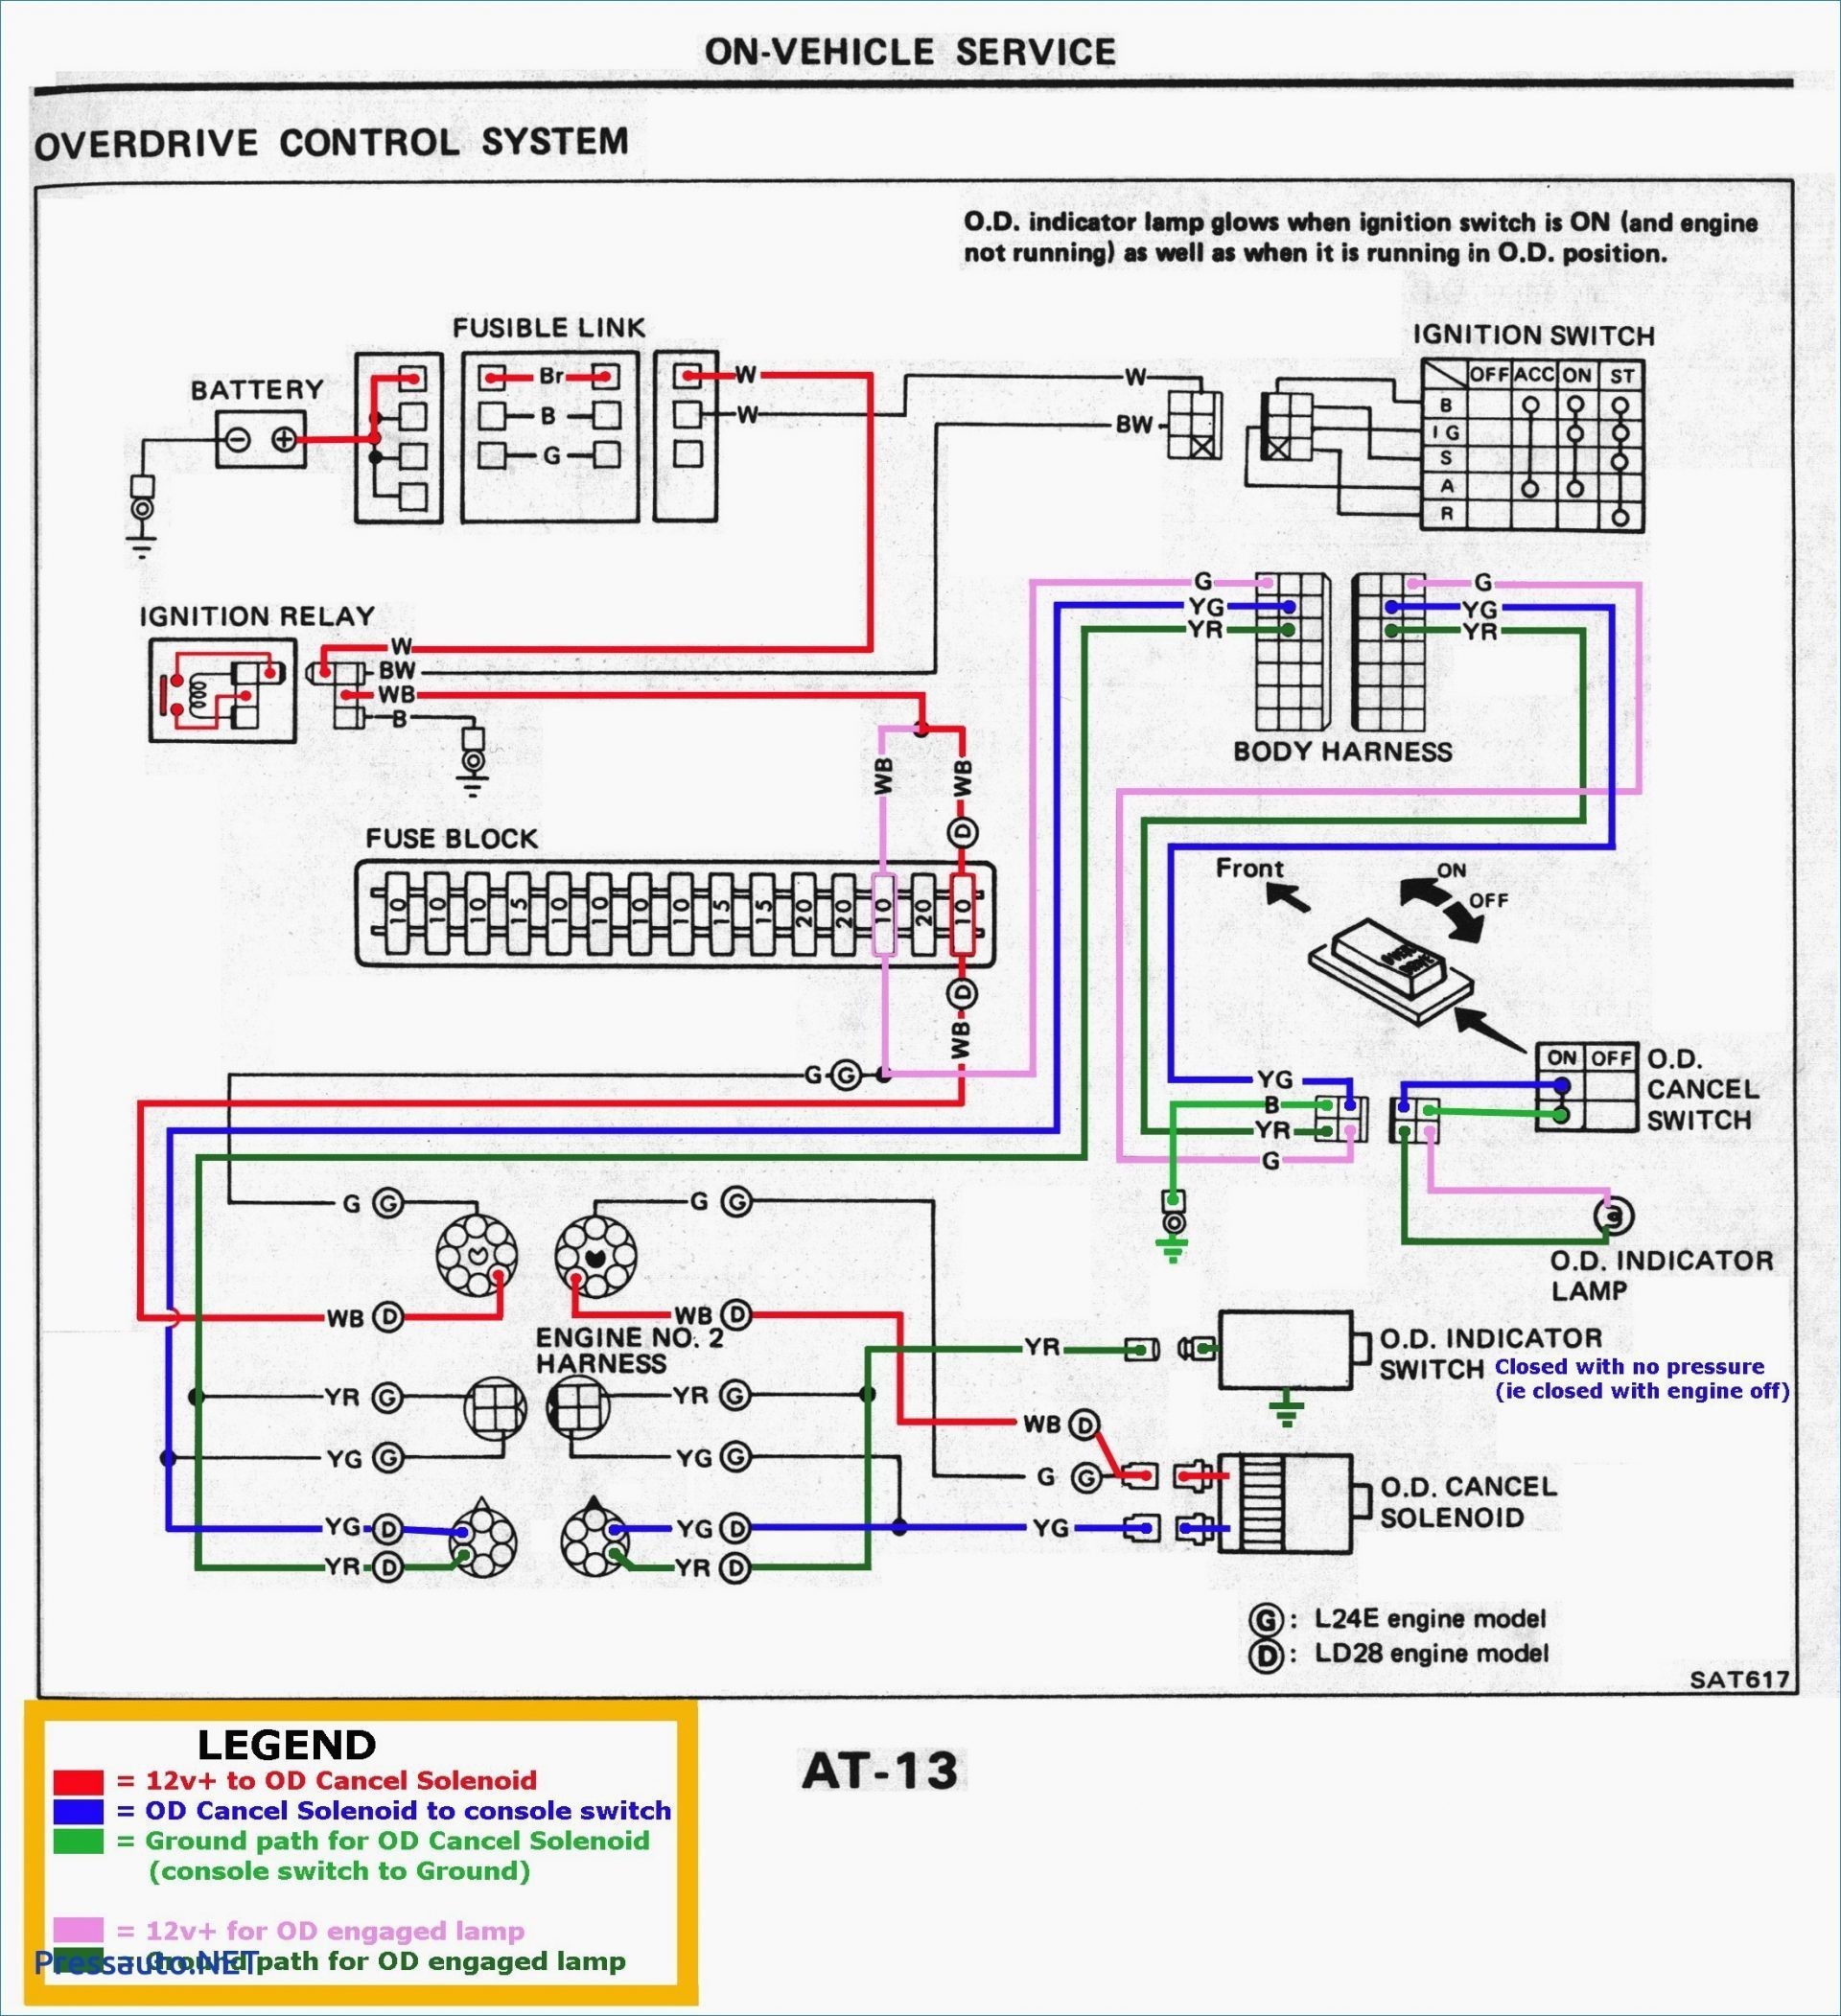 Wiring Diagram Colors Reference Wiring Diagram Color Codes Automotive Best Car Lamp Wiring Diagram